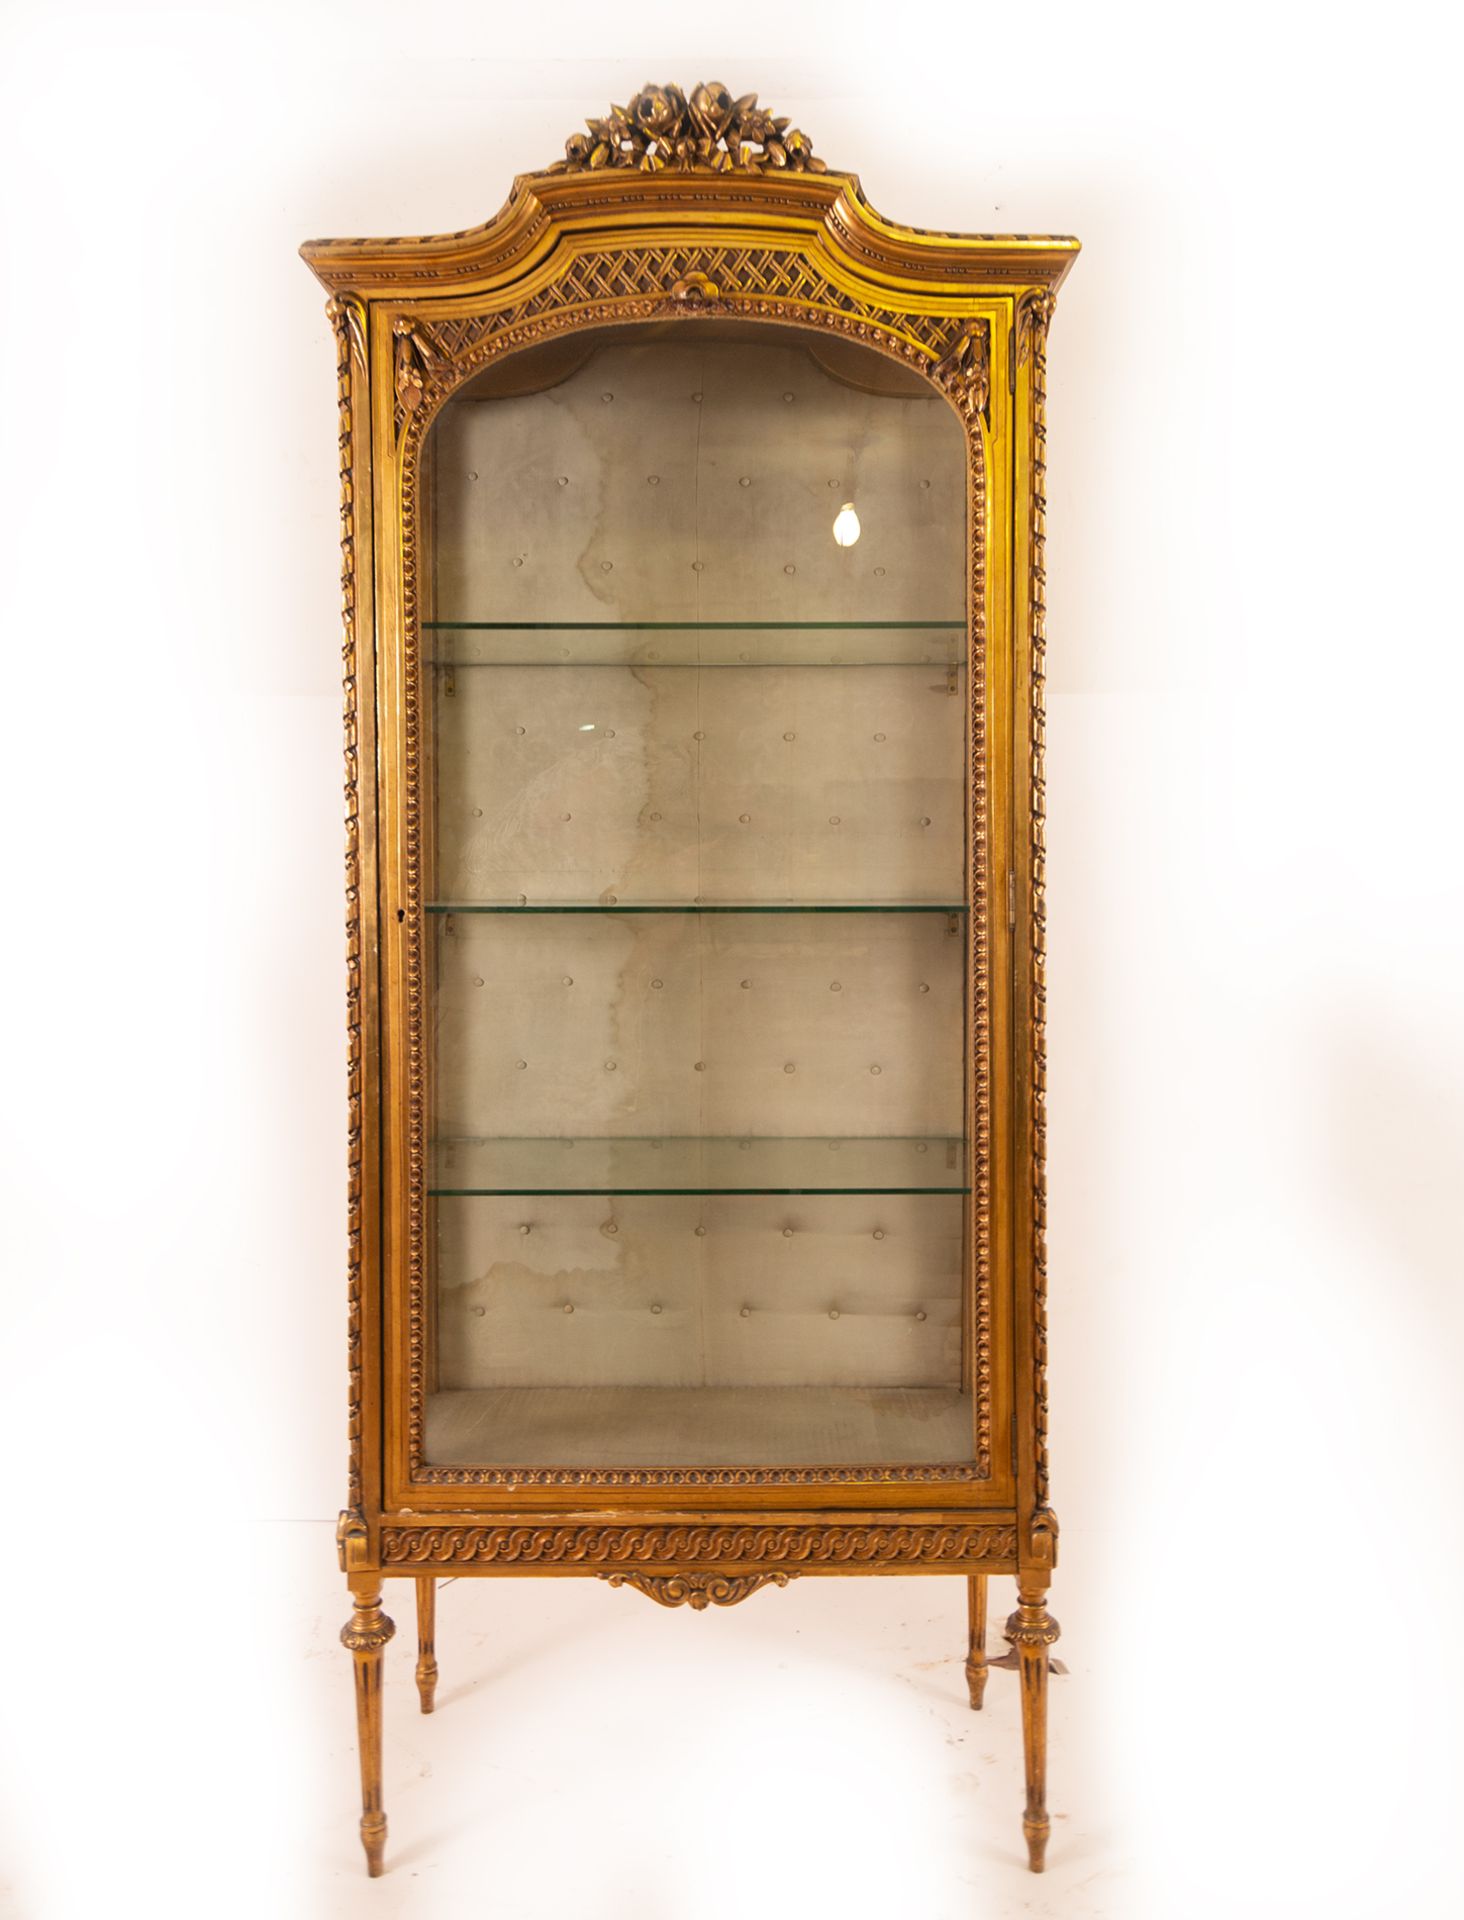 Elegant Louis XV style display case in gilt wood and glass, 19th century French school